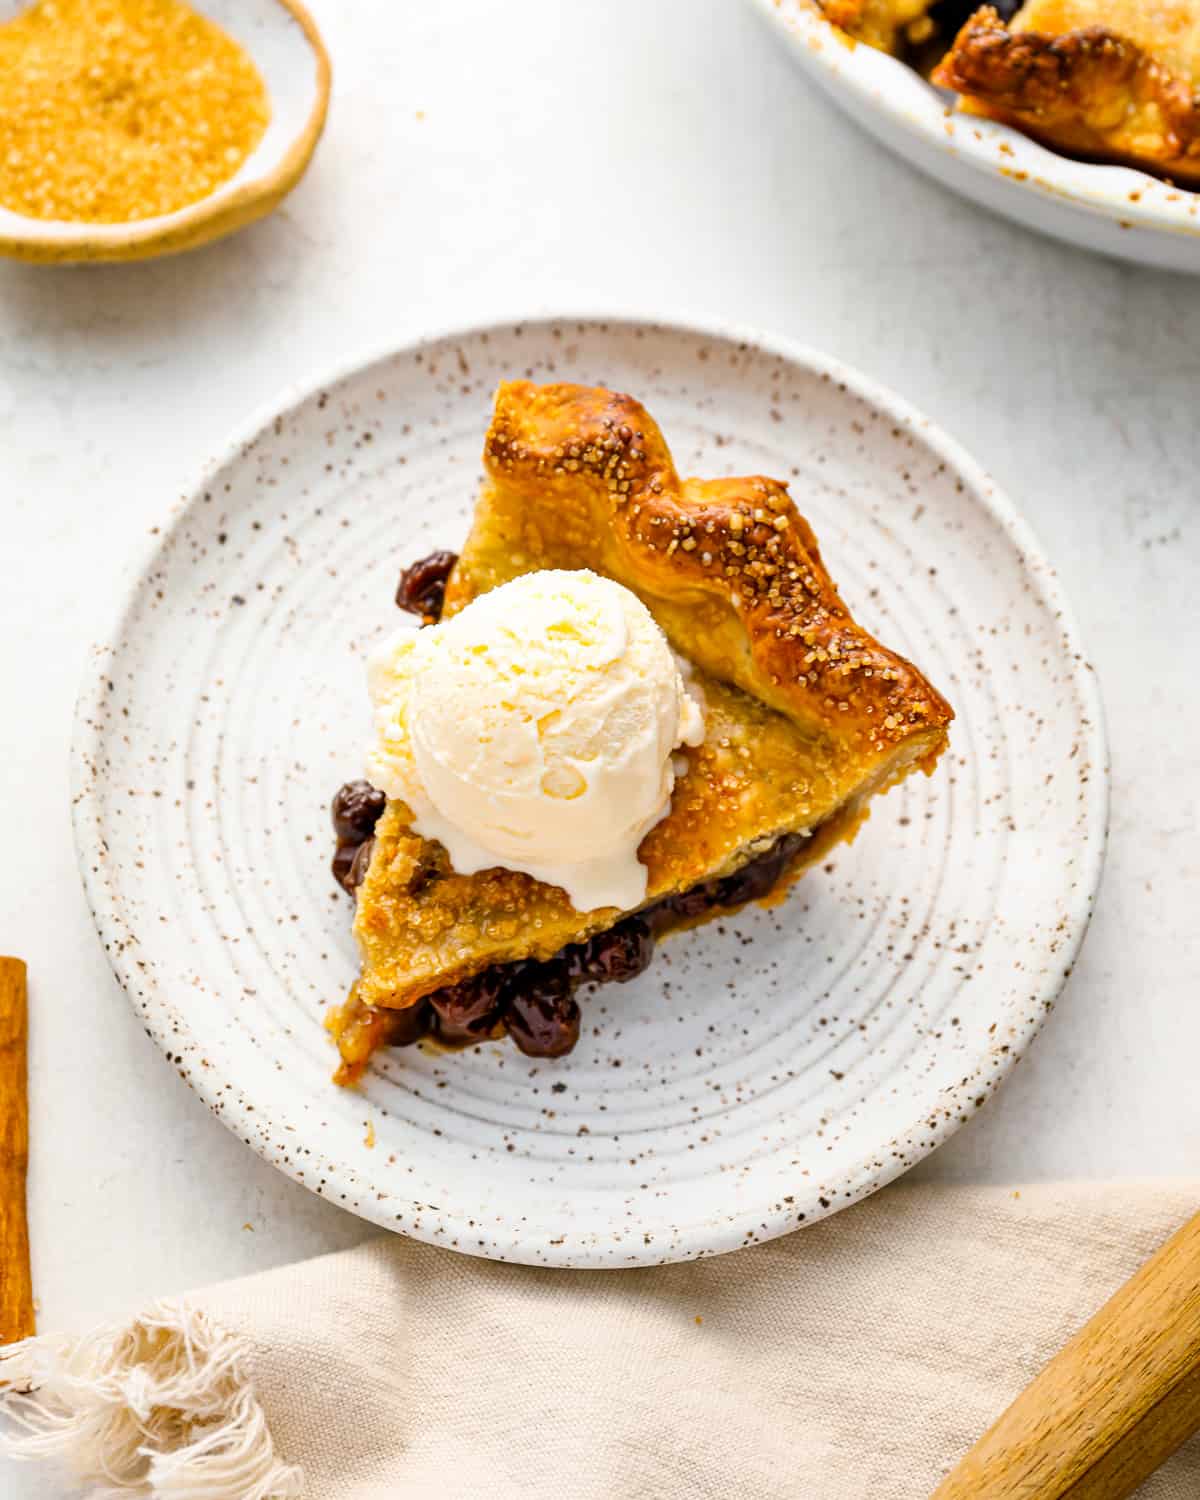 a slice of raisin pie with ice cream on a plate.